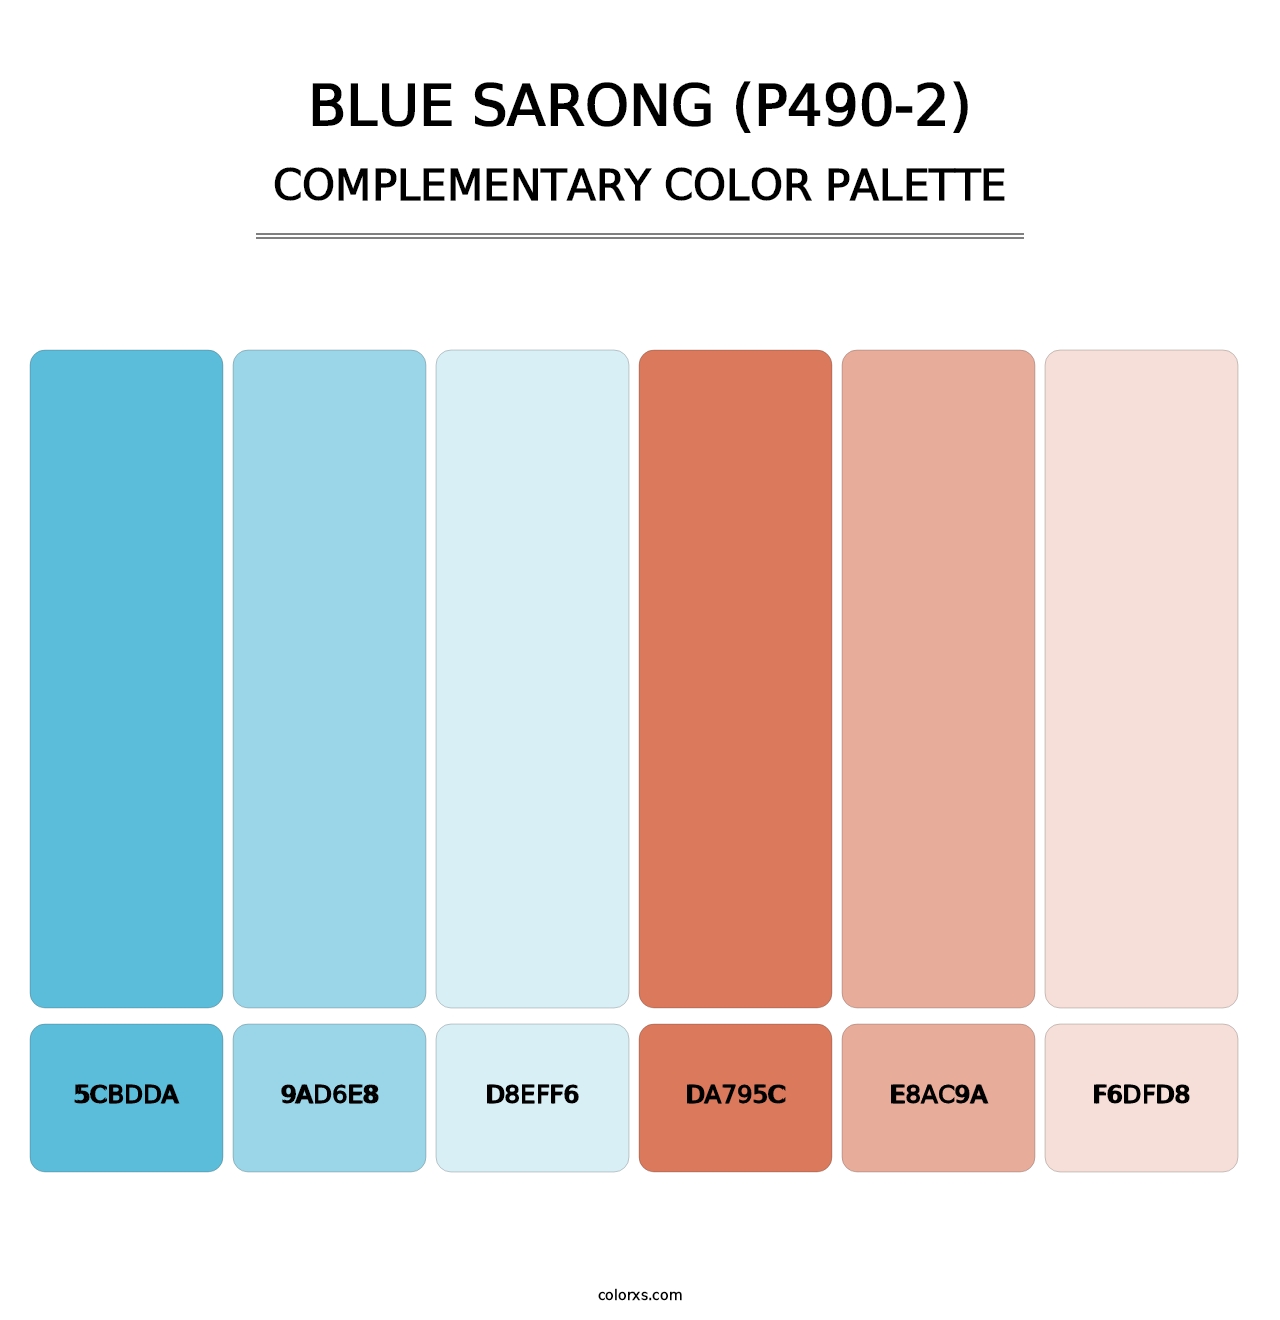 Blue Sarong (P490-2) - Complementary Color Palette